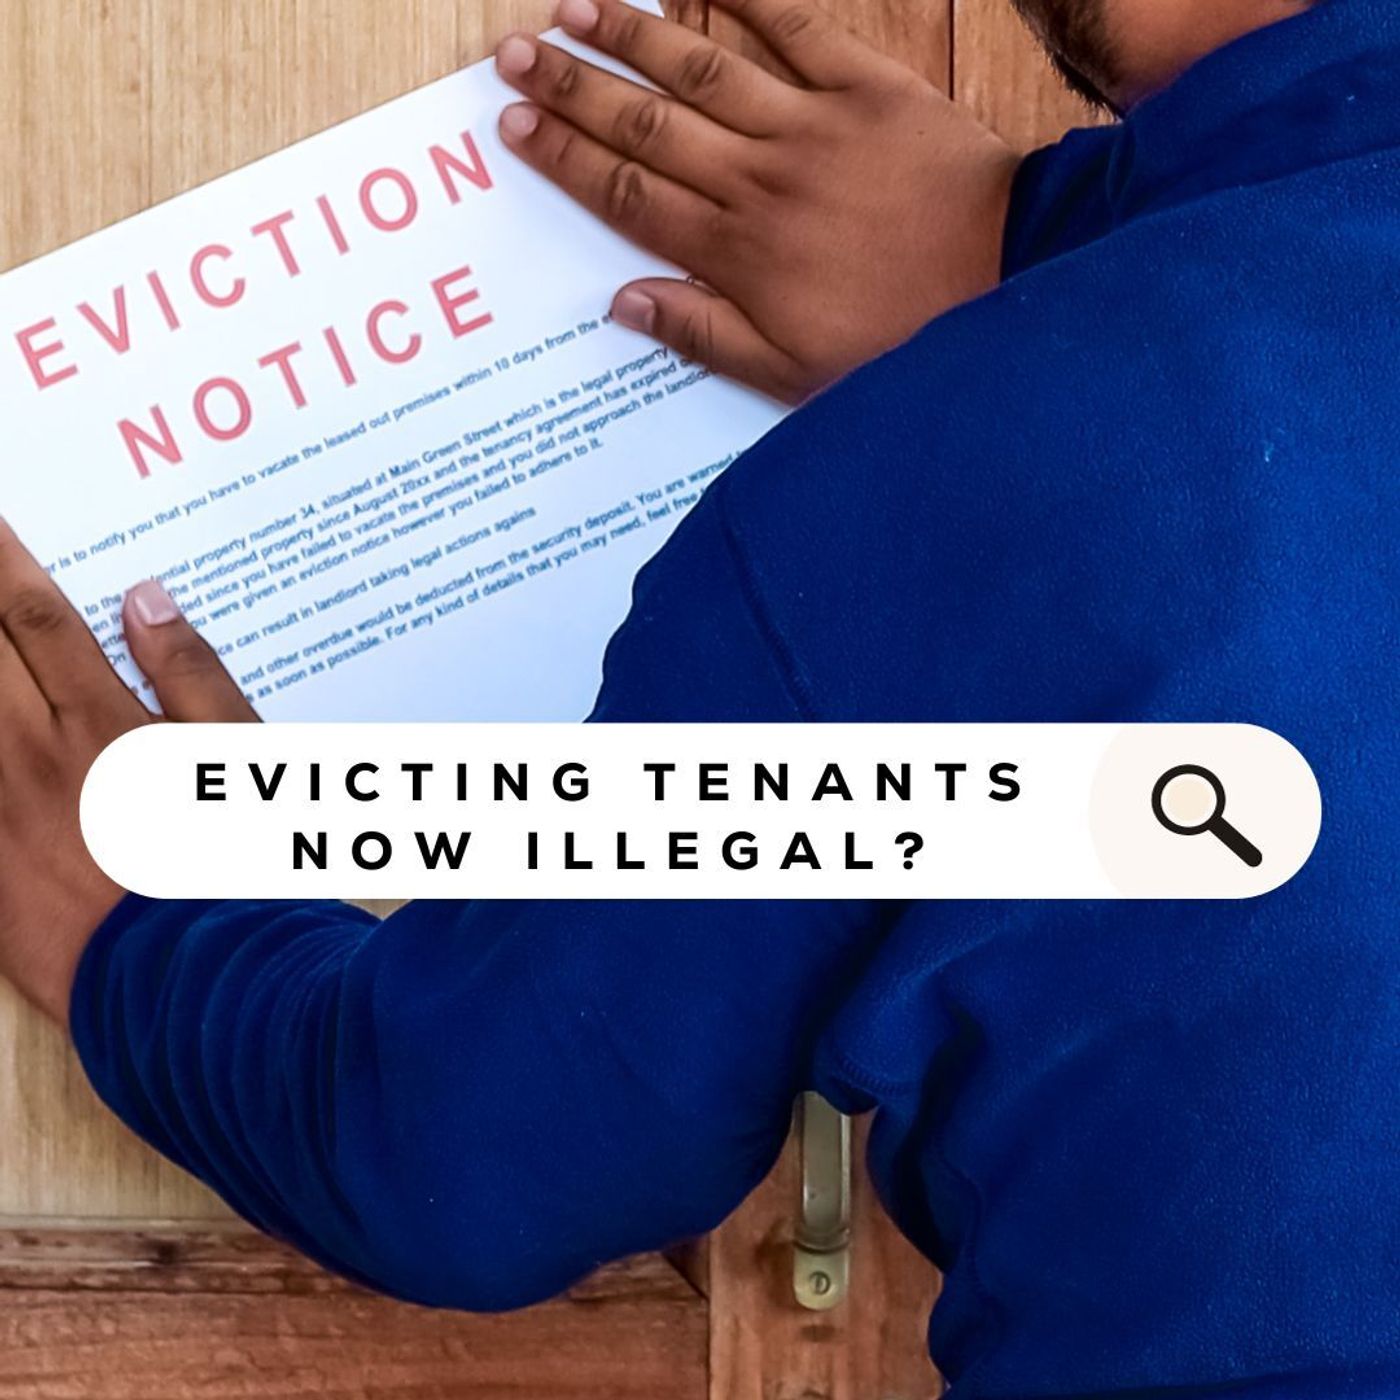 16: Evicting Tenants Now Illegal?